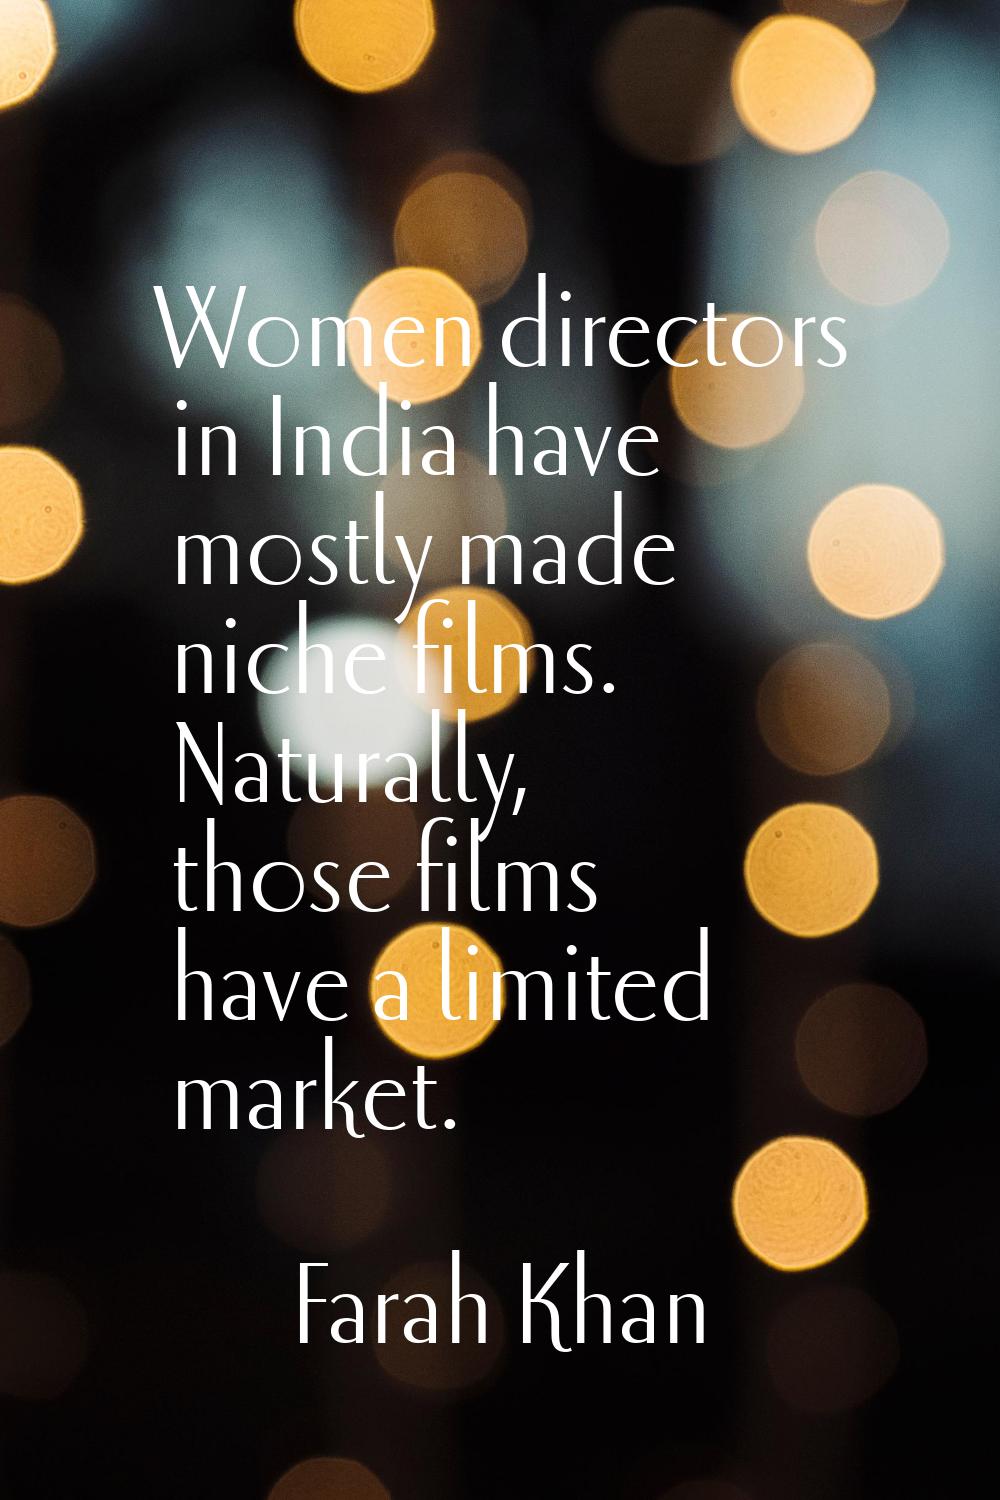 Women directors in India have mostly made niche films. Naturally, those films have a limited market